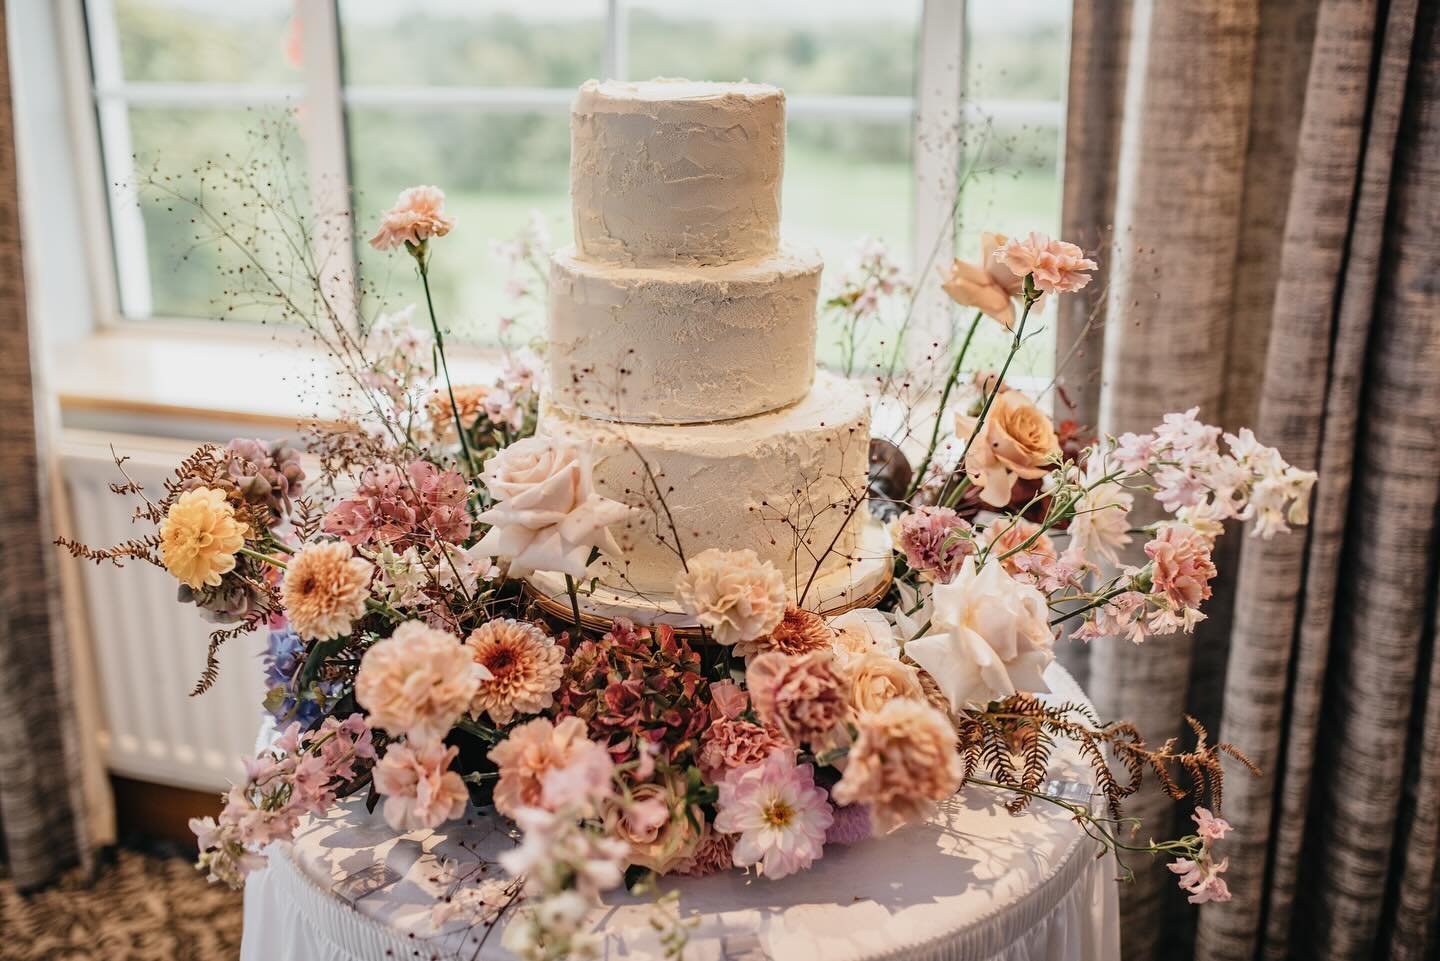 Cake of dreams..well my dreams! ✨
Still obsessed with my wedding cake lovingly made by my talented Aunt surrounded by flowers - what more could you want! 

📸: @agnieszka_marsh_photography